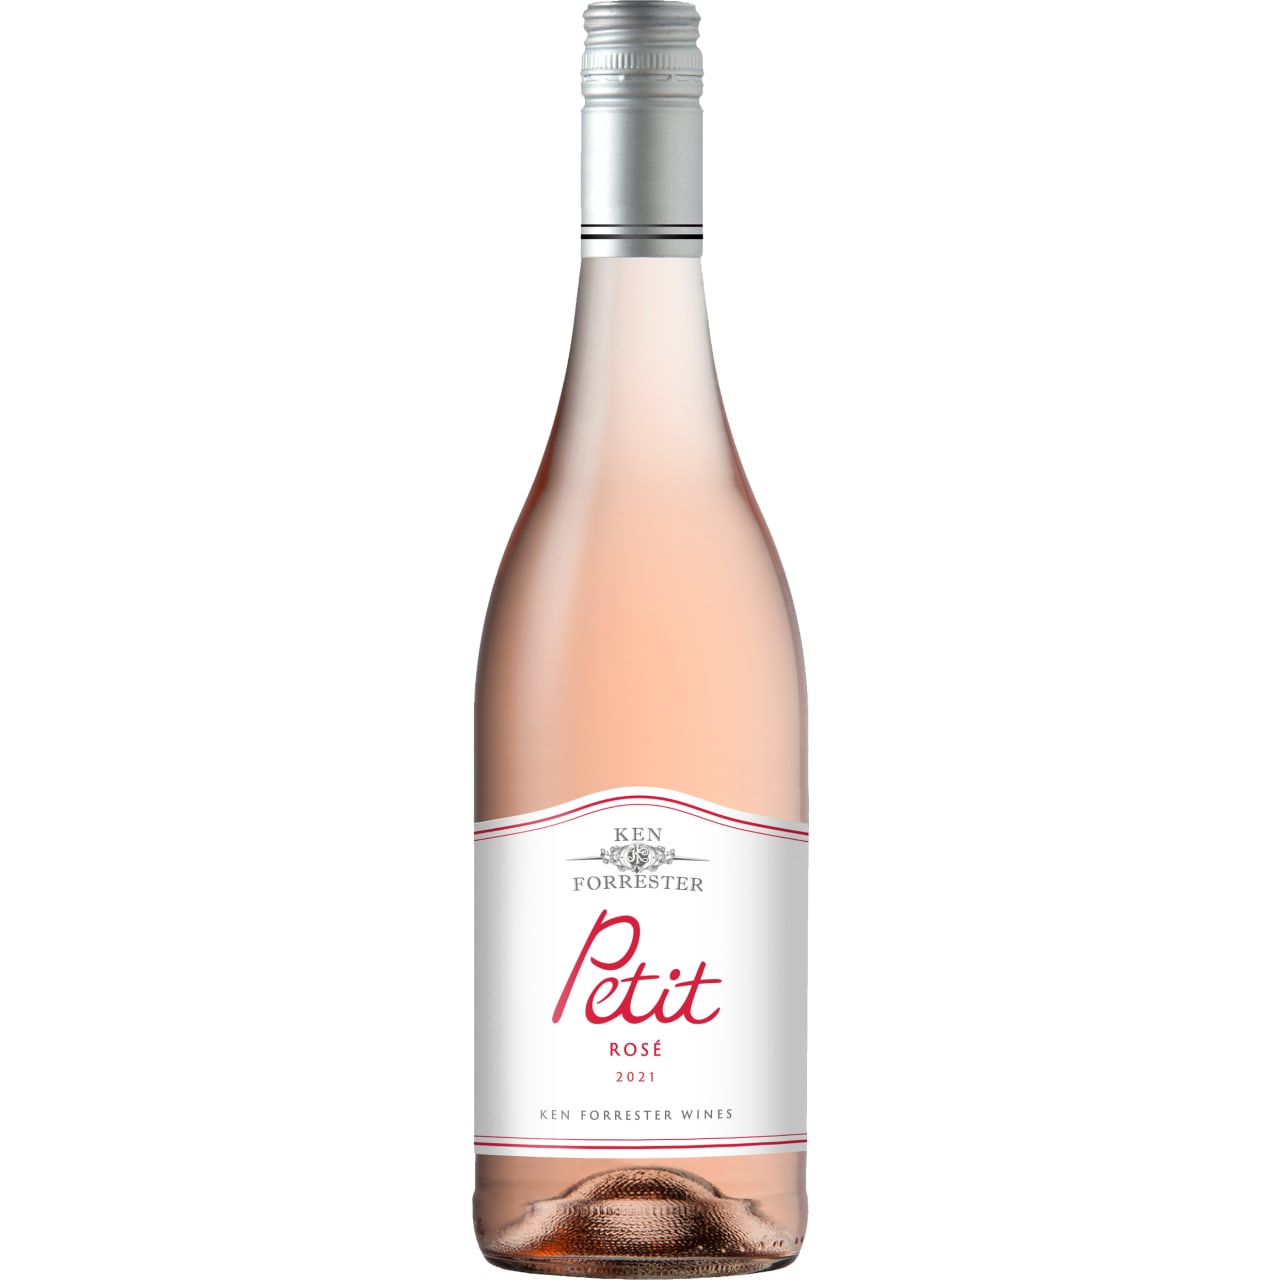 This very elegant bright salmon pink Rosé overwhelms the nose with aromas of freshly picked strawberries, rose petal and cherry flavours.